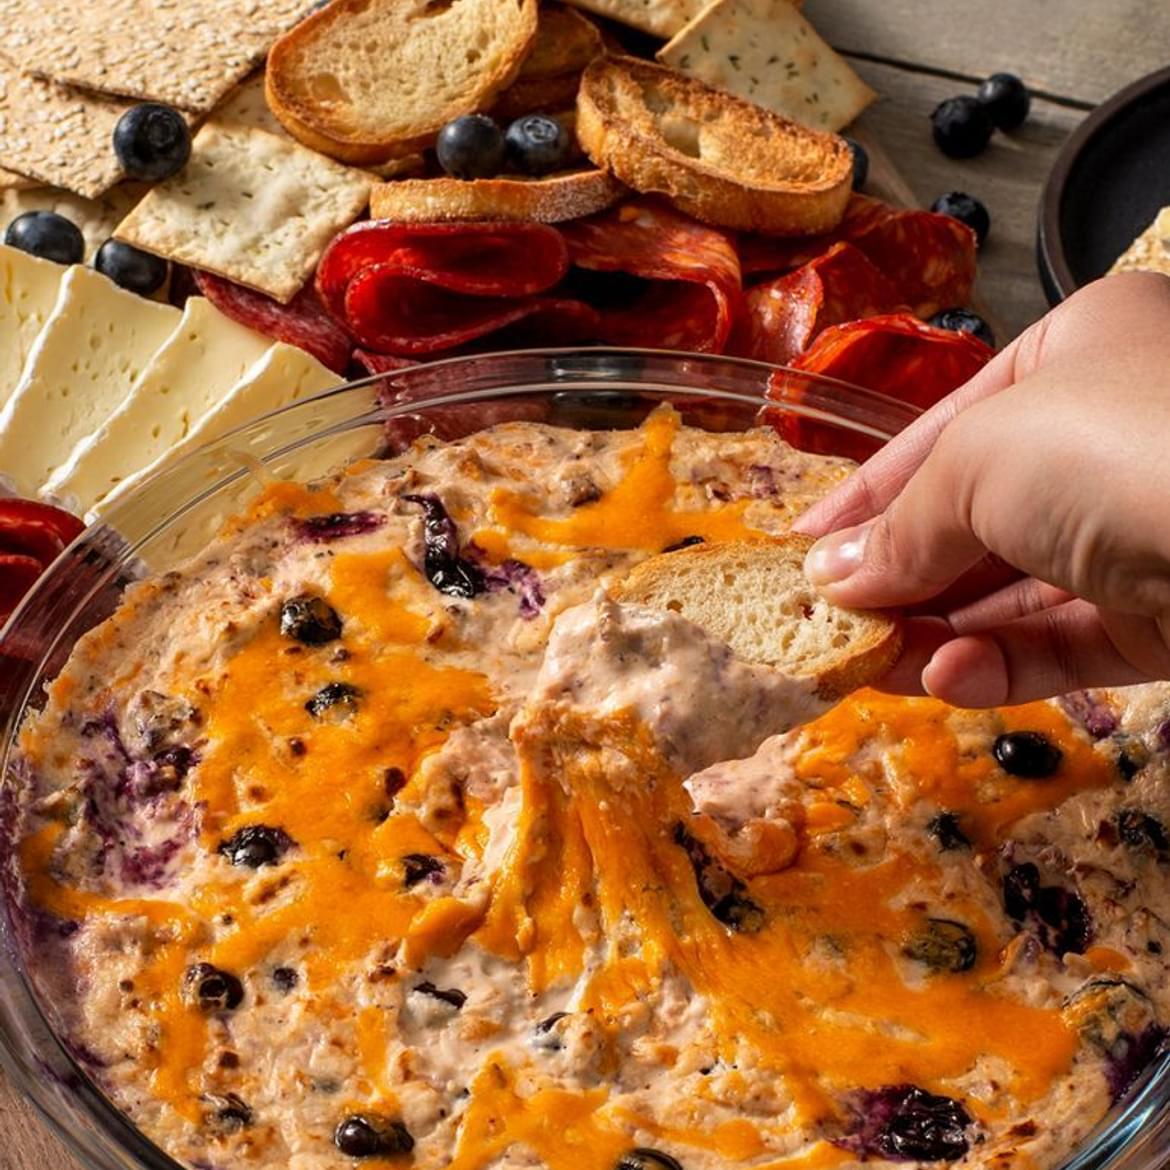 Hot Blueberry Cheese and Bacon Dip 111 940x1409 772x1132